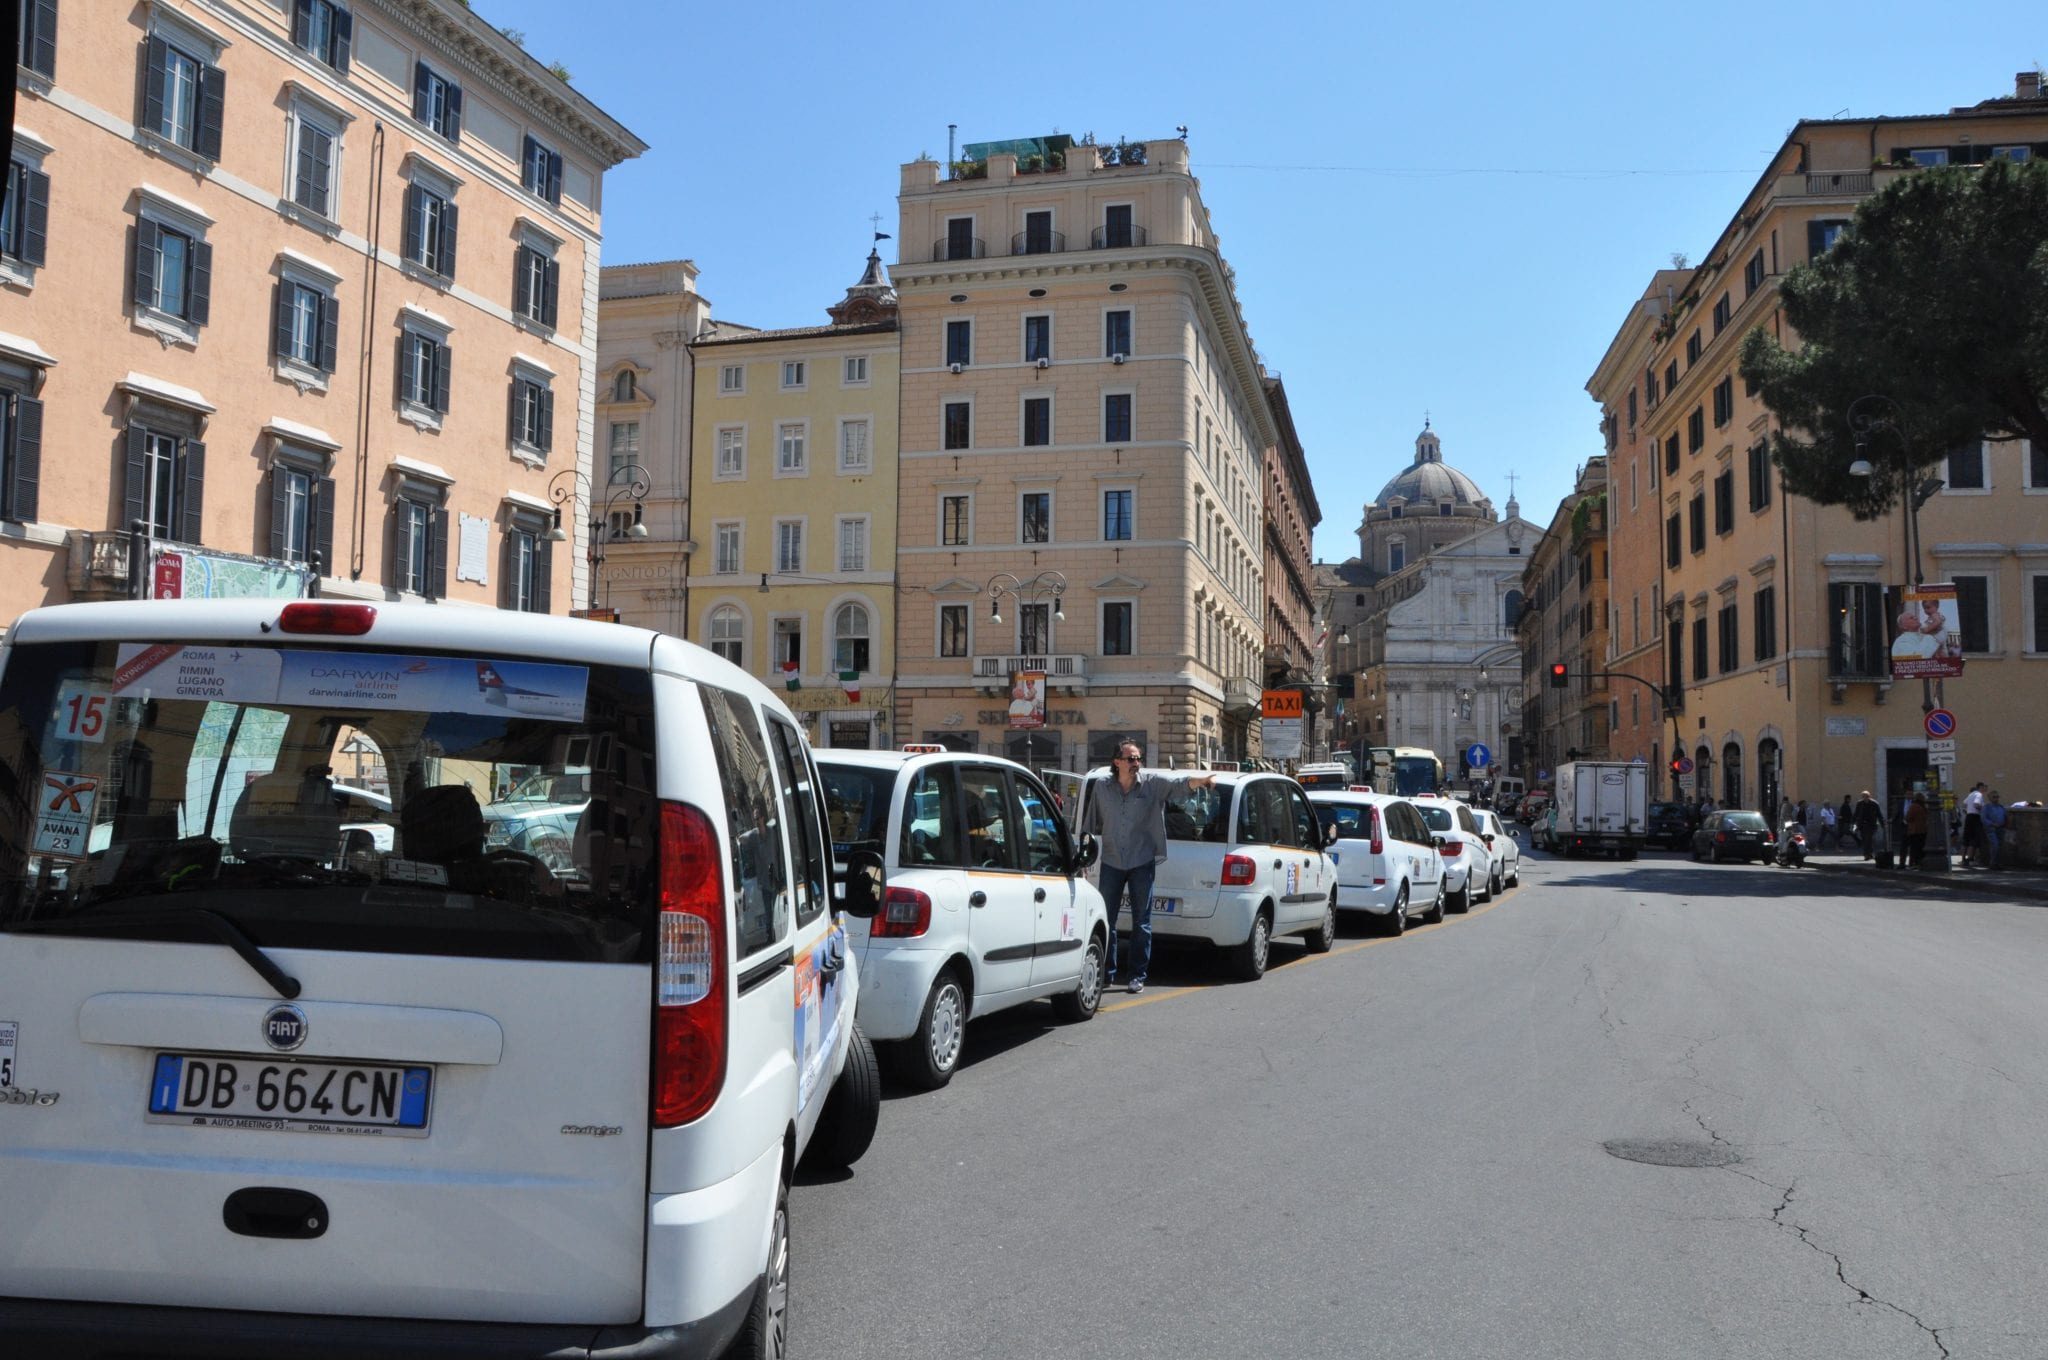 Cab rank in Italy